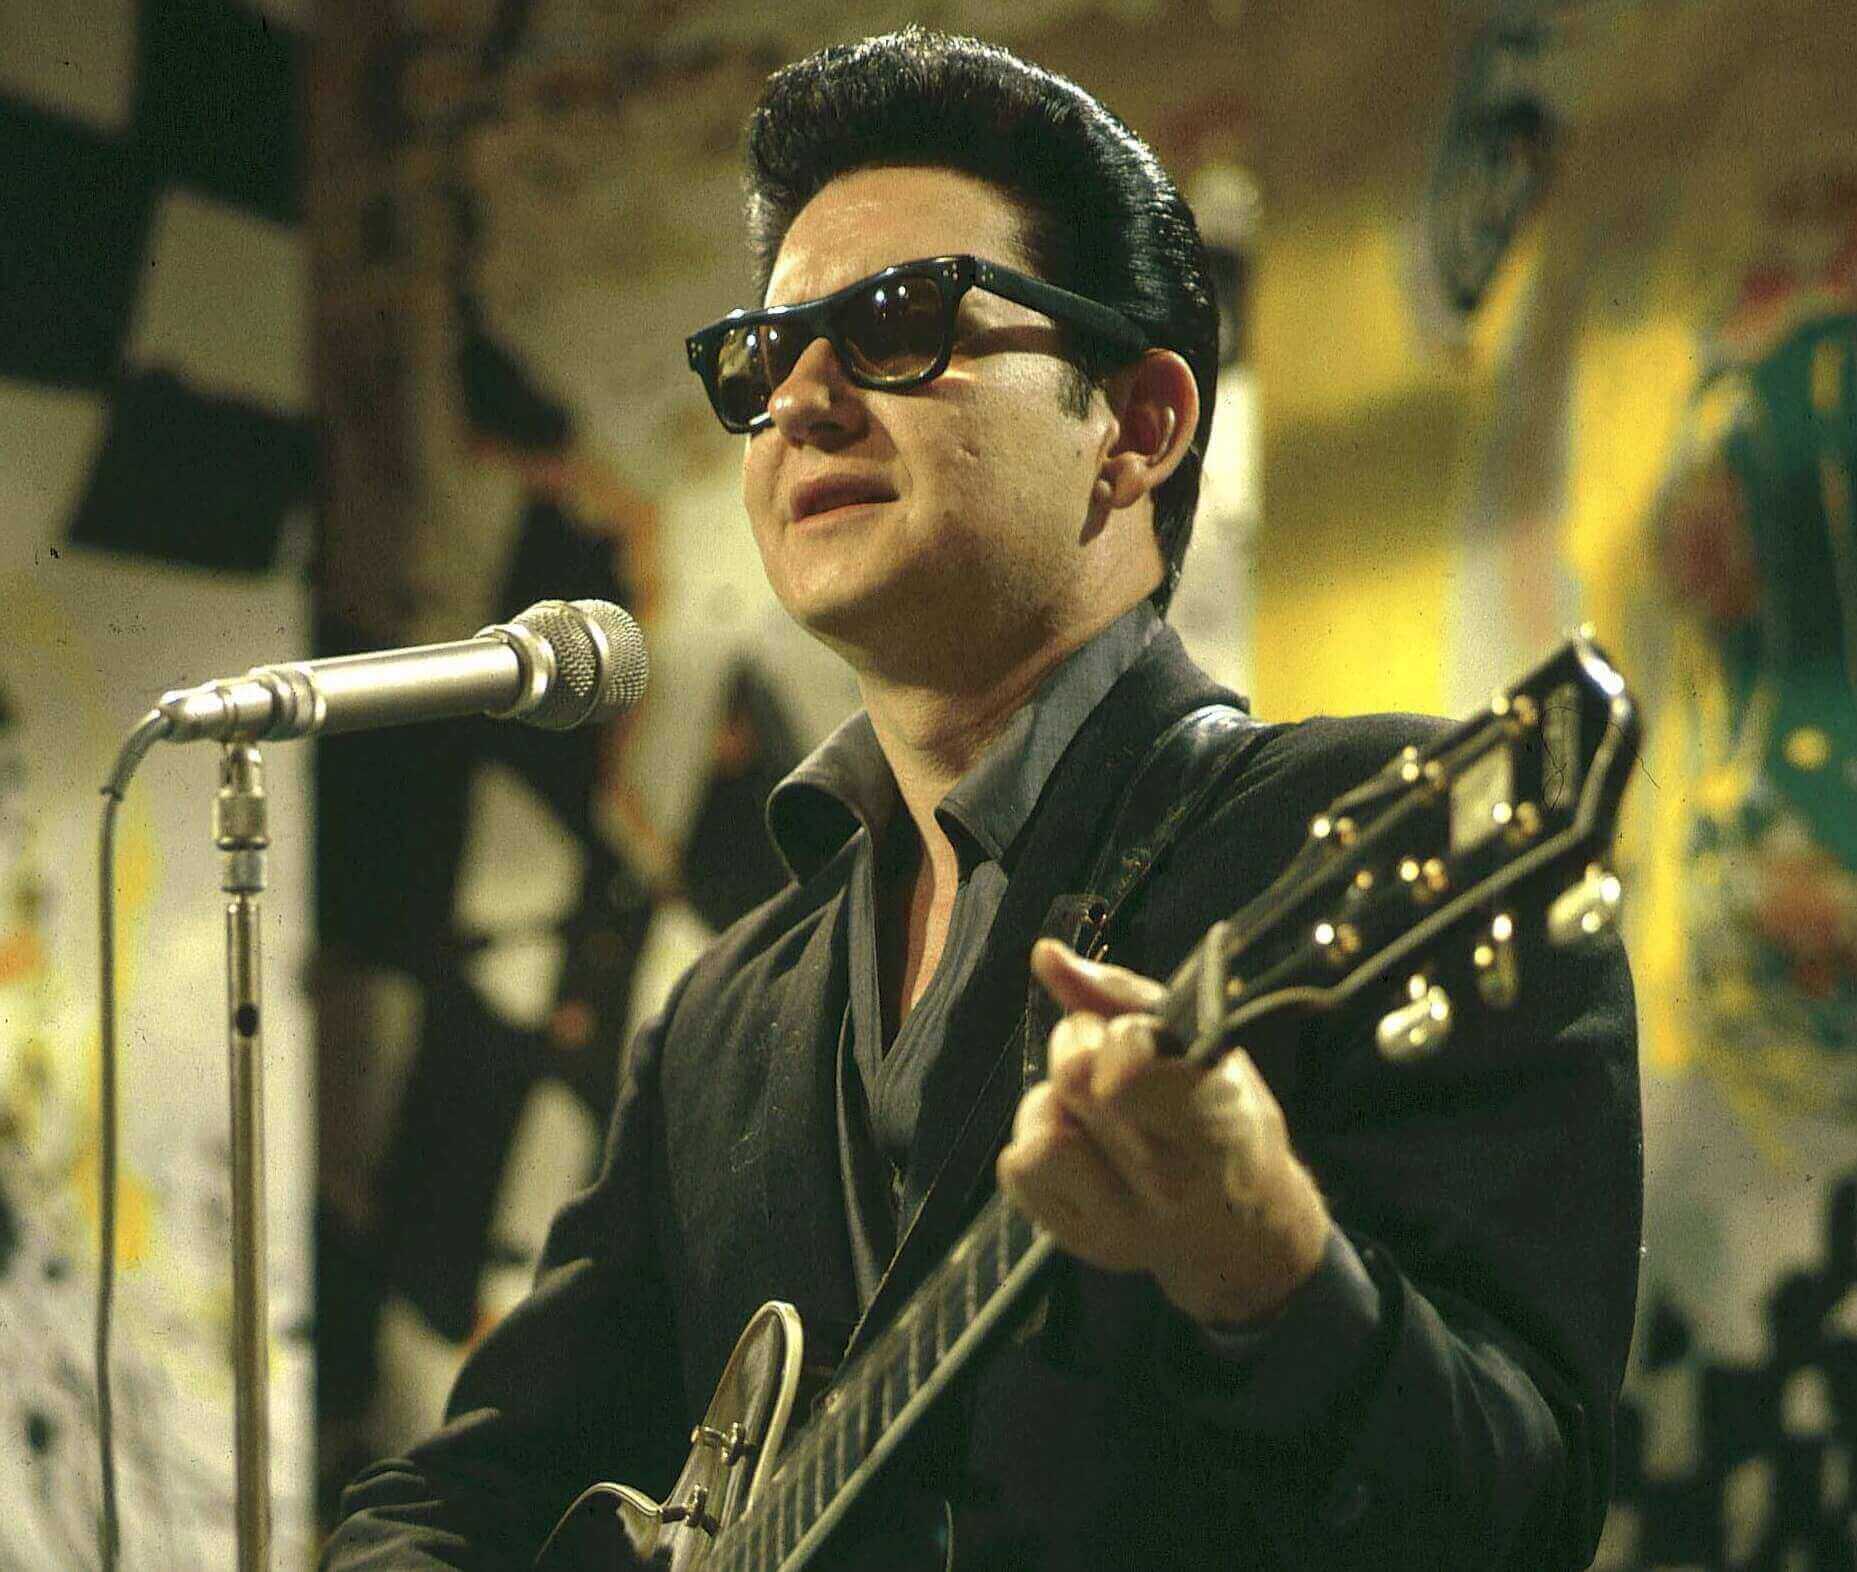 Roy Orbison with a guitar